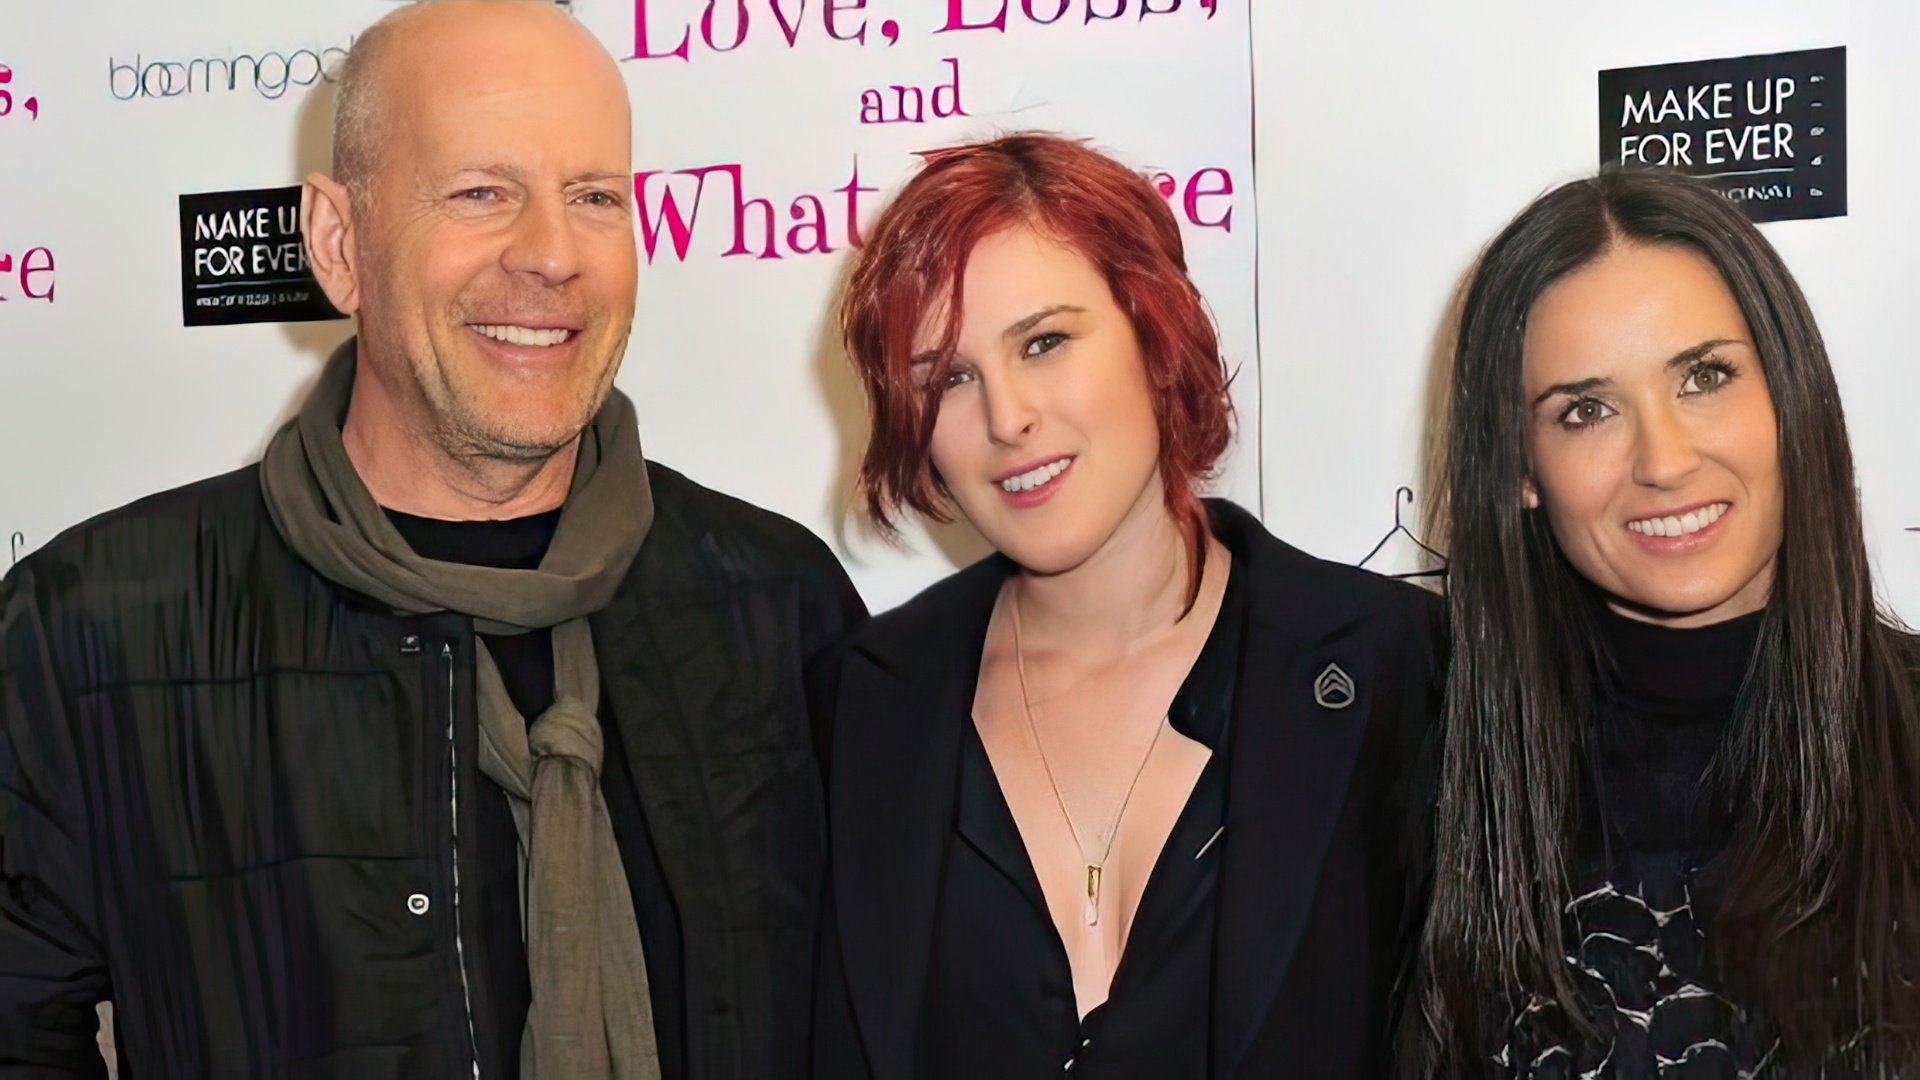 Rumer Willis resembles rather her father than mother